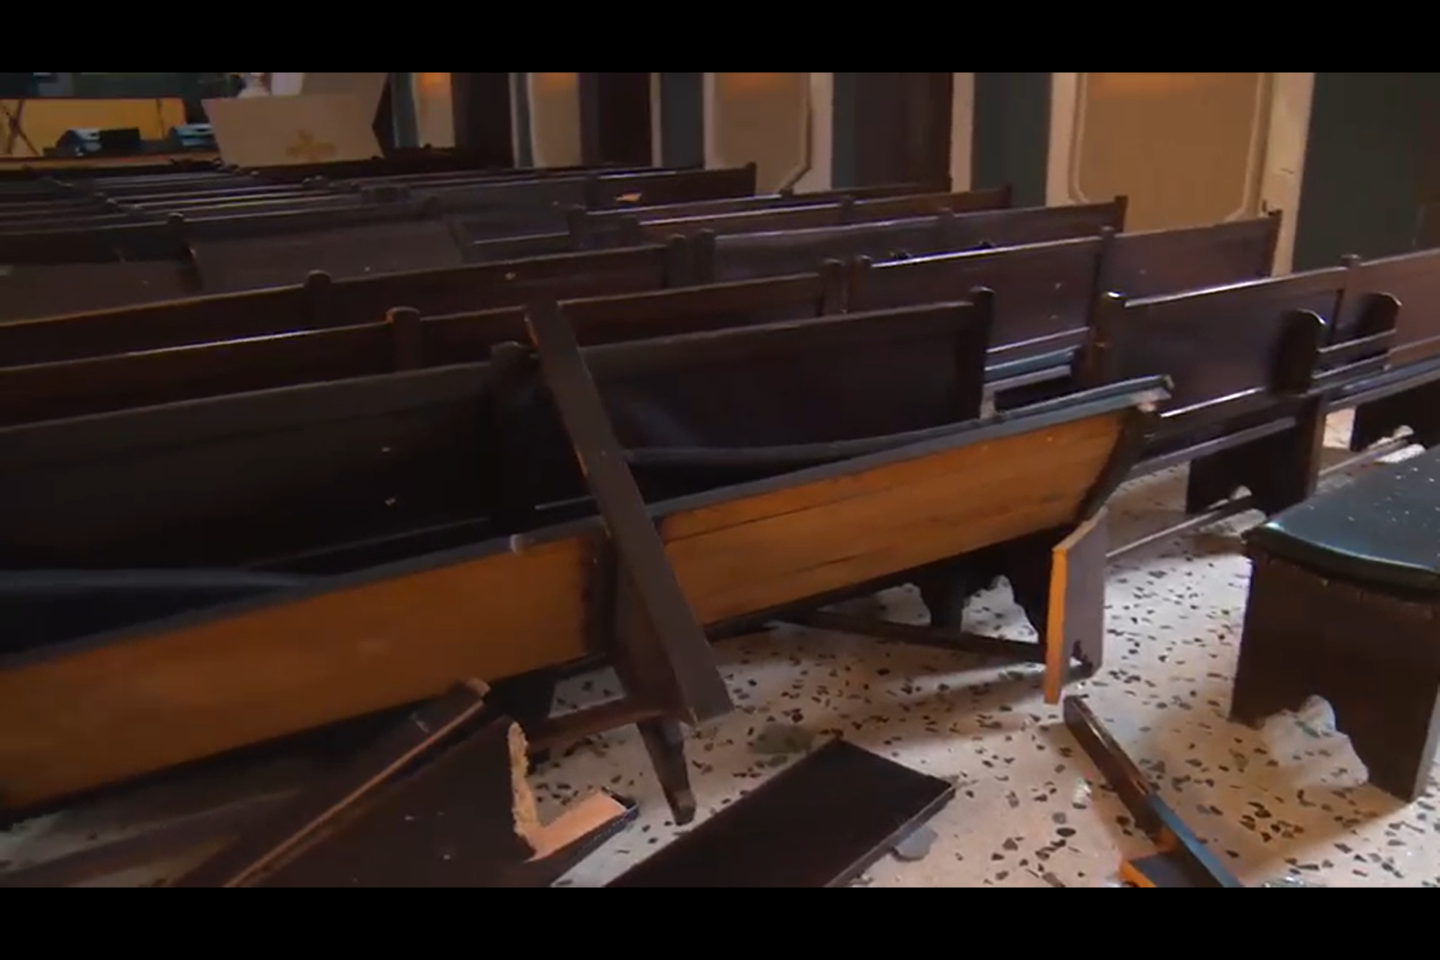 Pews in the church sanctuary destroyed from the impact of the blast